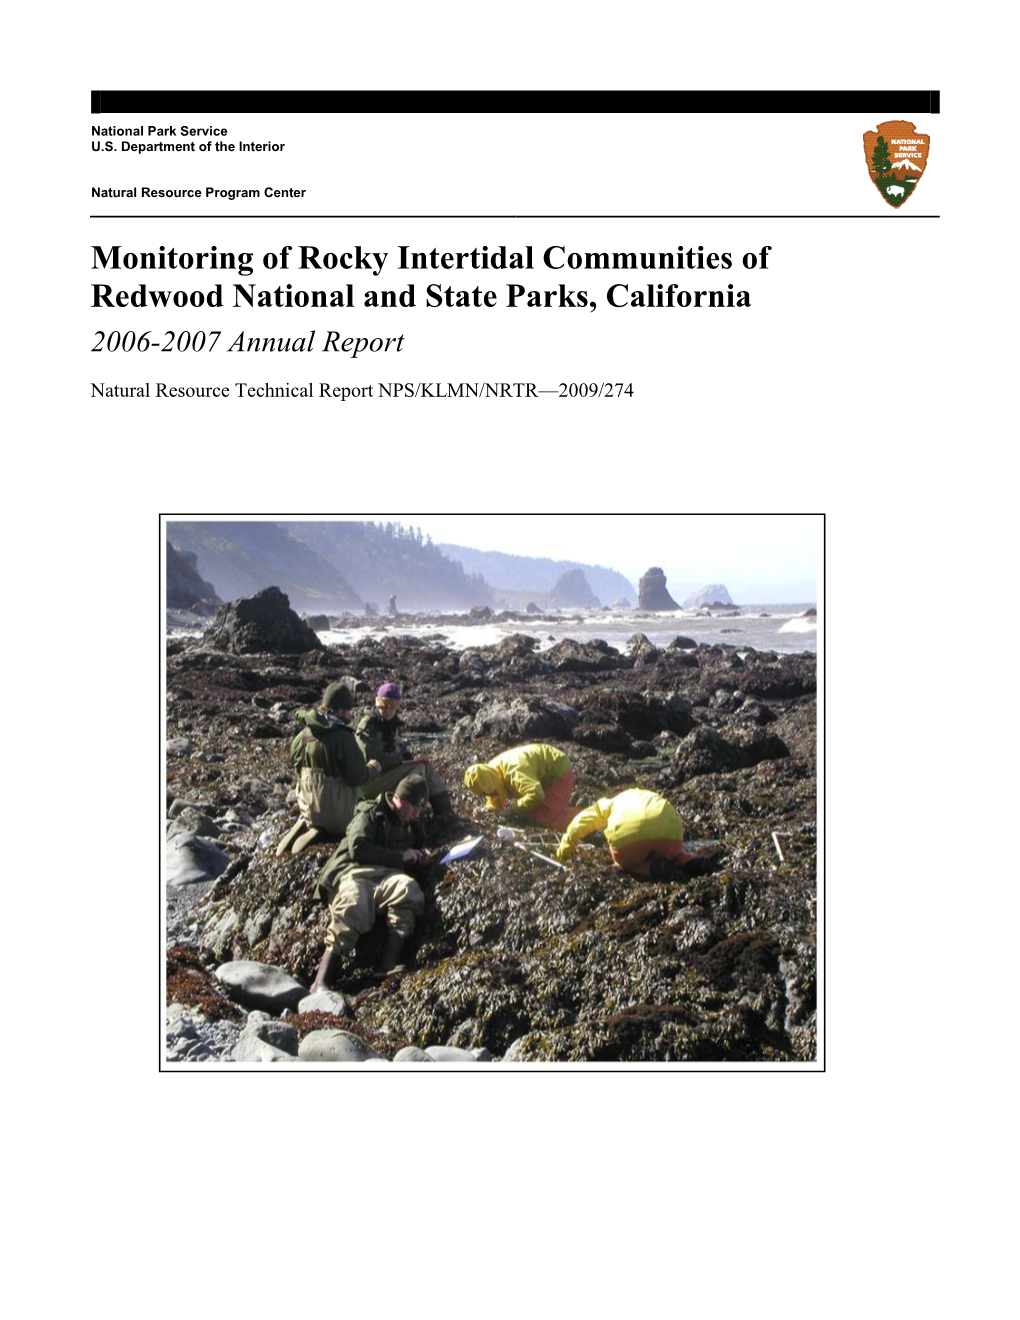 Monitoring of Rocky Intertidal Communities of Redwood National and State Parks, California 2006-2007 Annual Report